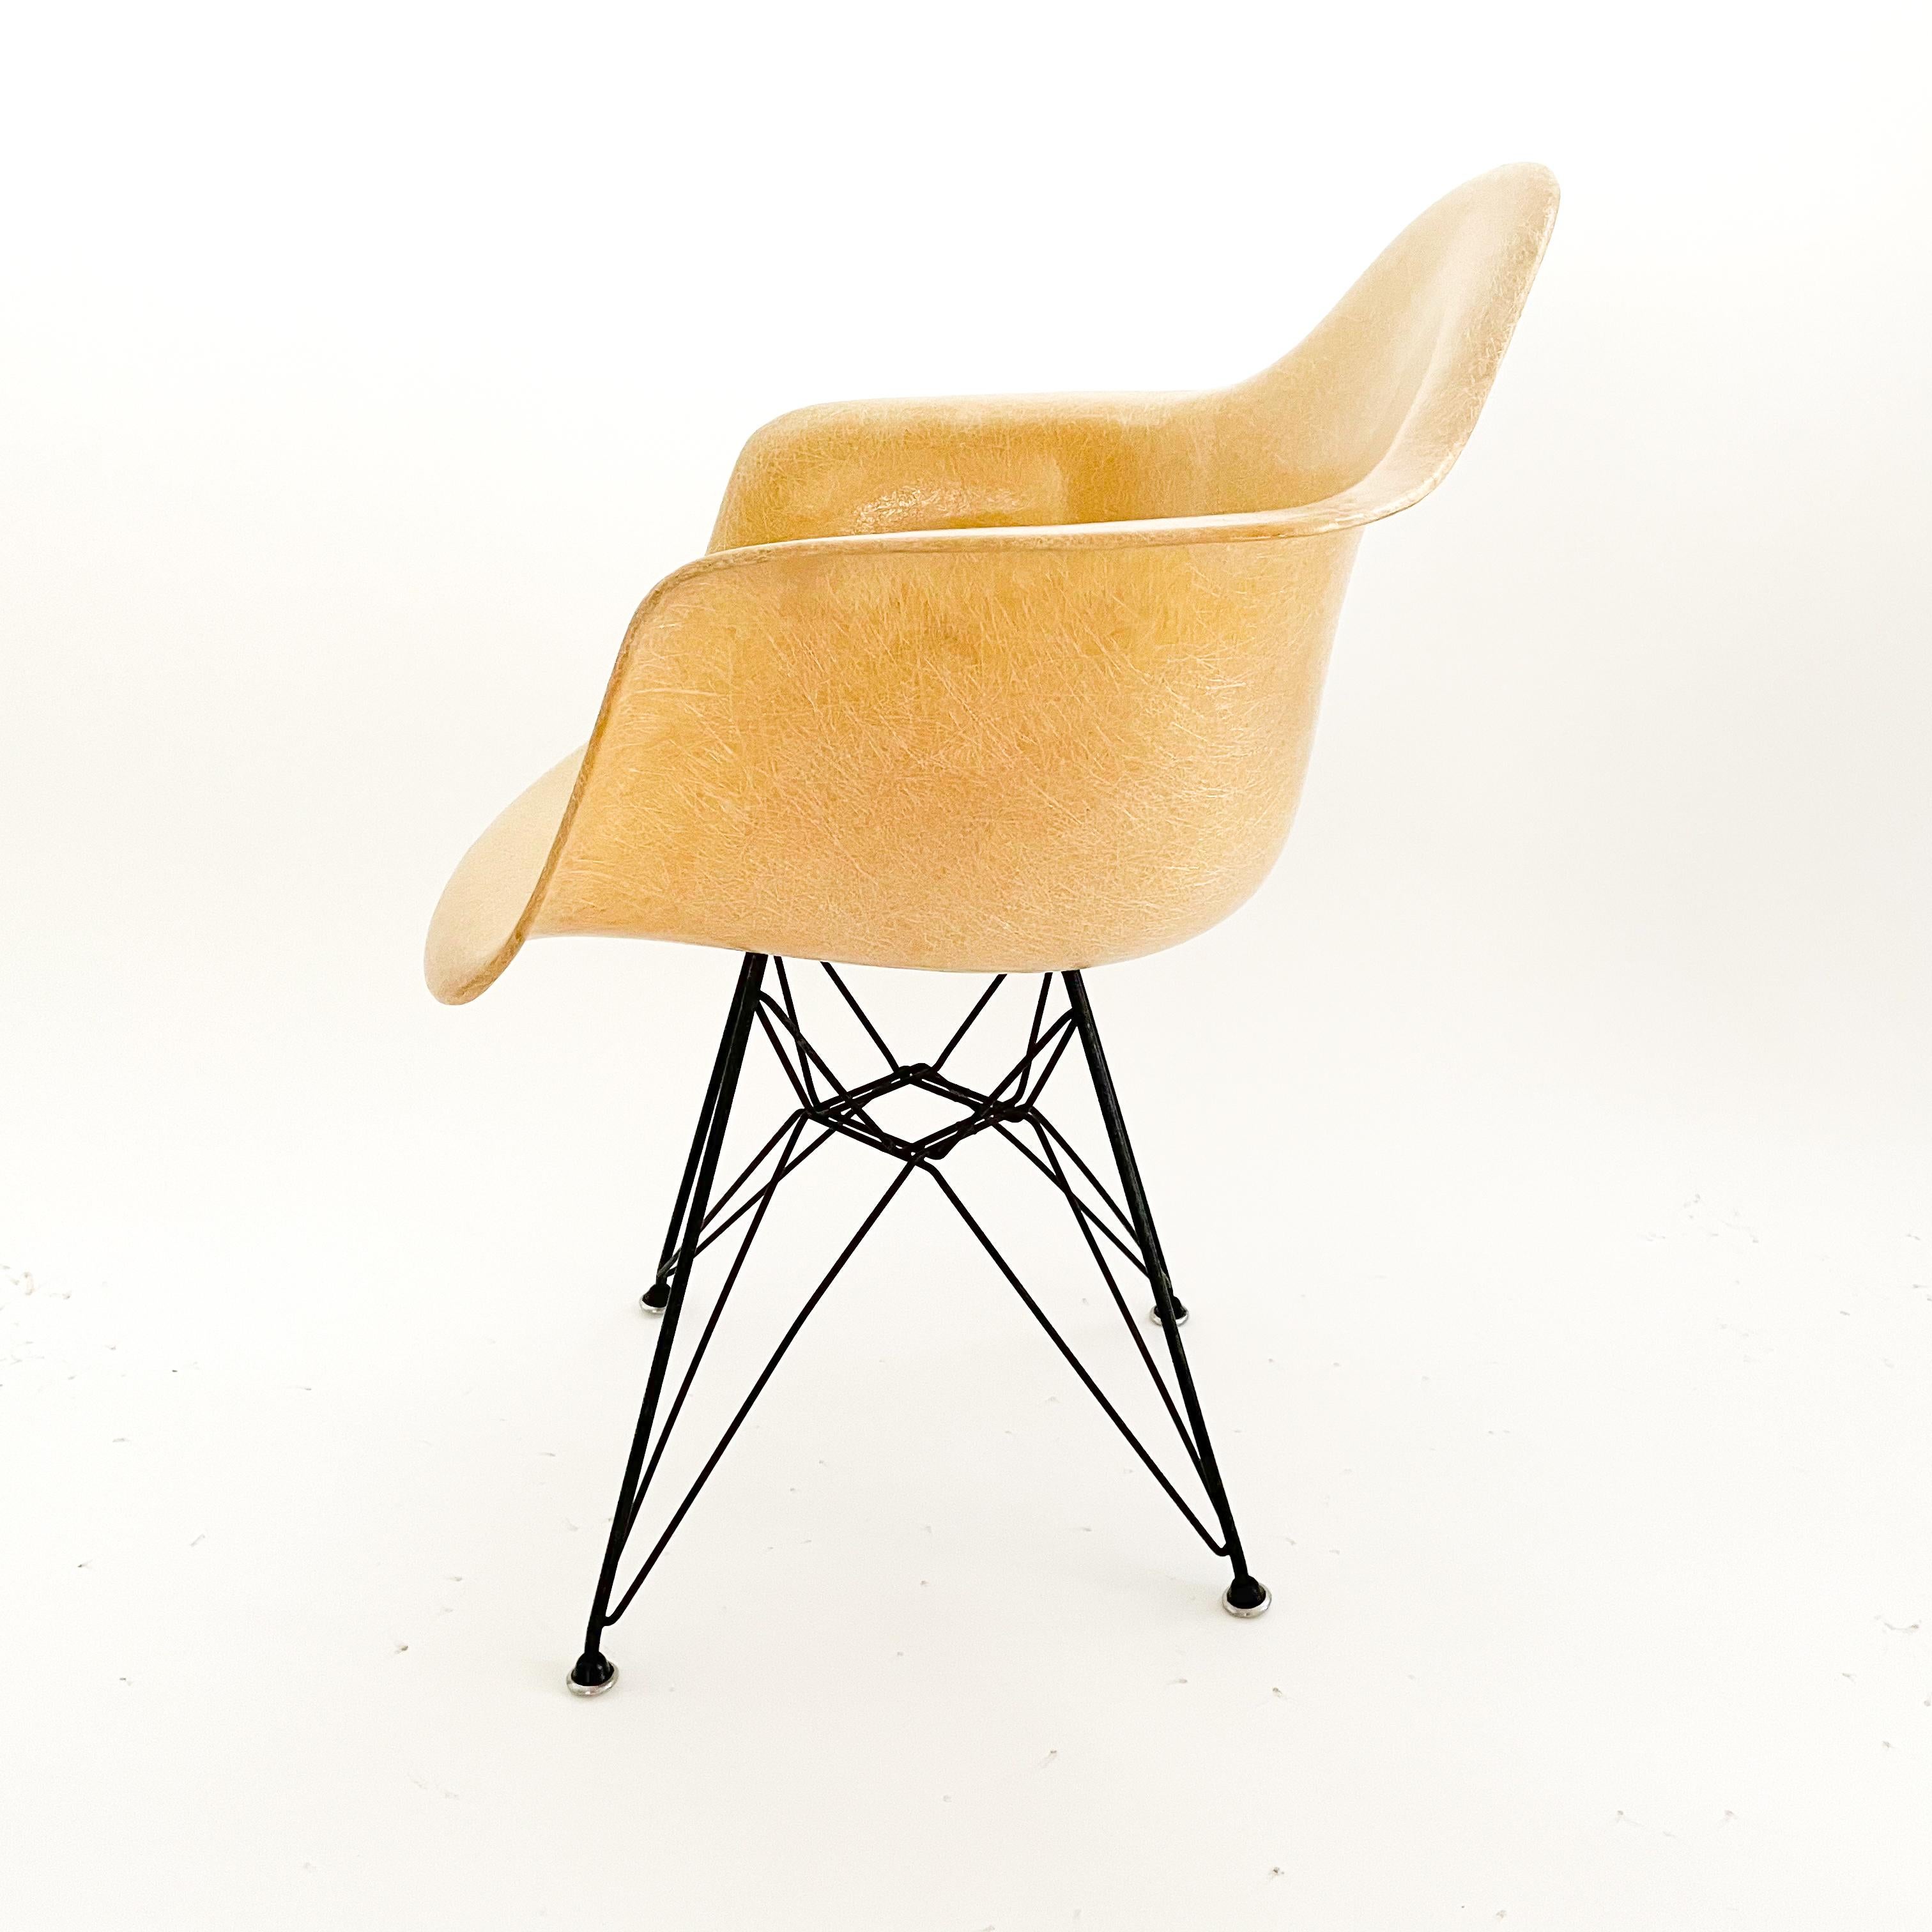 Mid-20th Century Eames DAR Fiberglass Armchair With Eiffel Base for Herman Miller C. 1954 For Sale